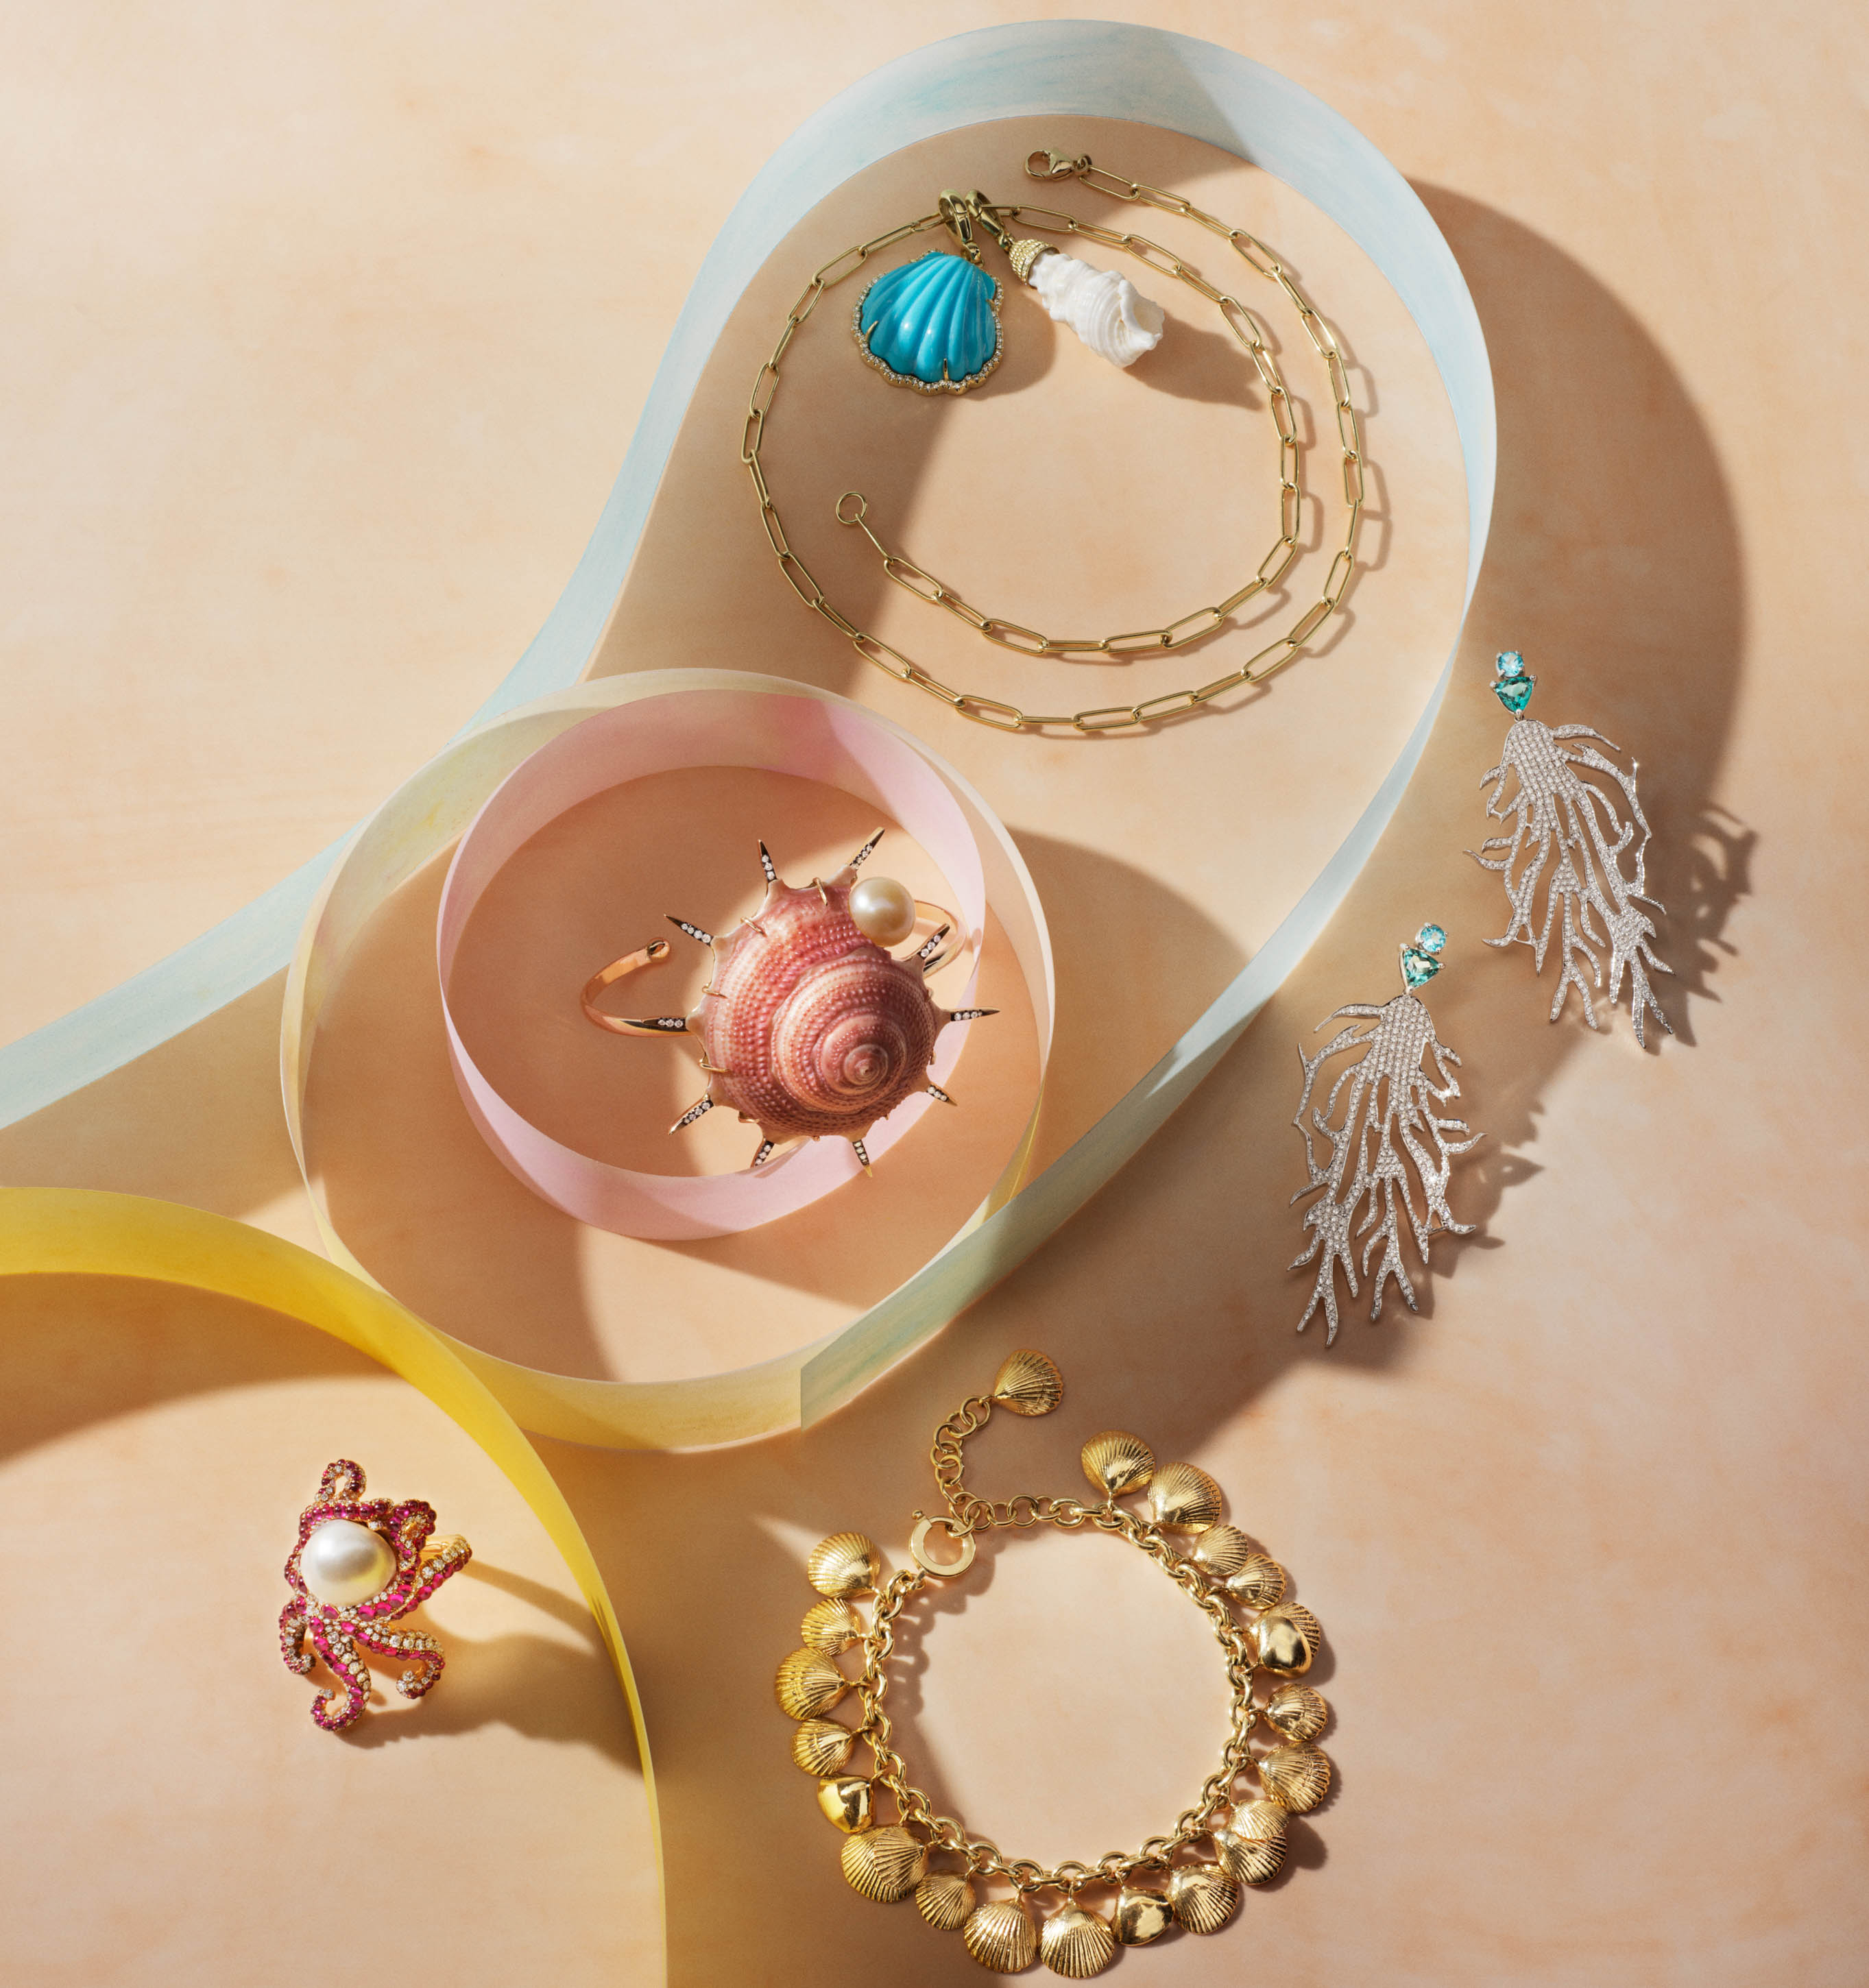 12 Jewelry Trends That Will Be Big in 2023